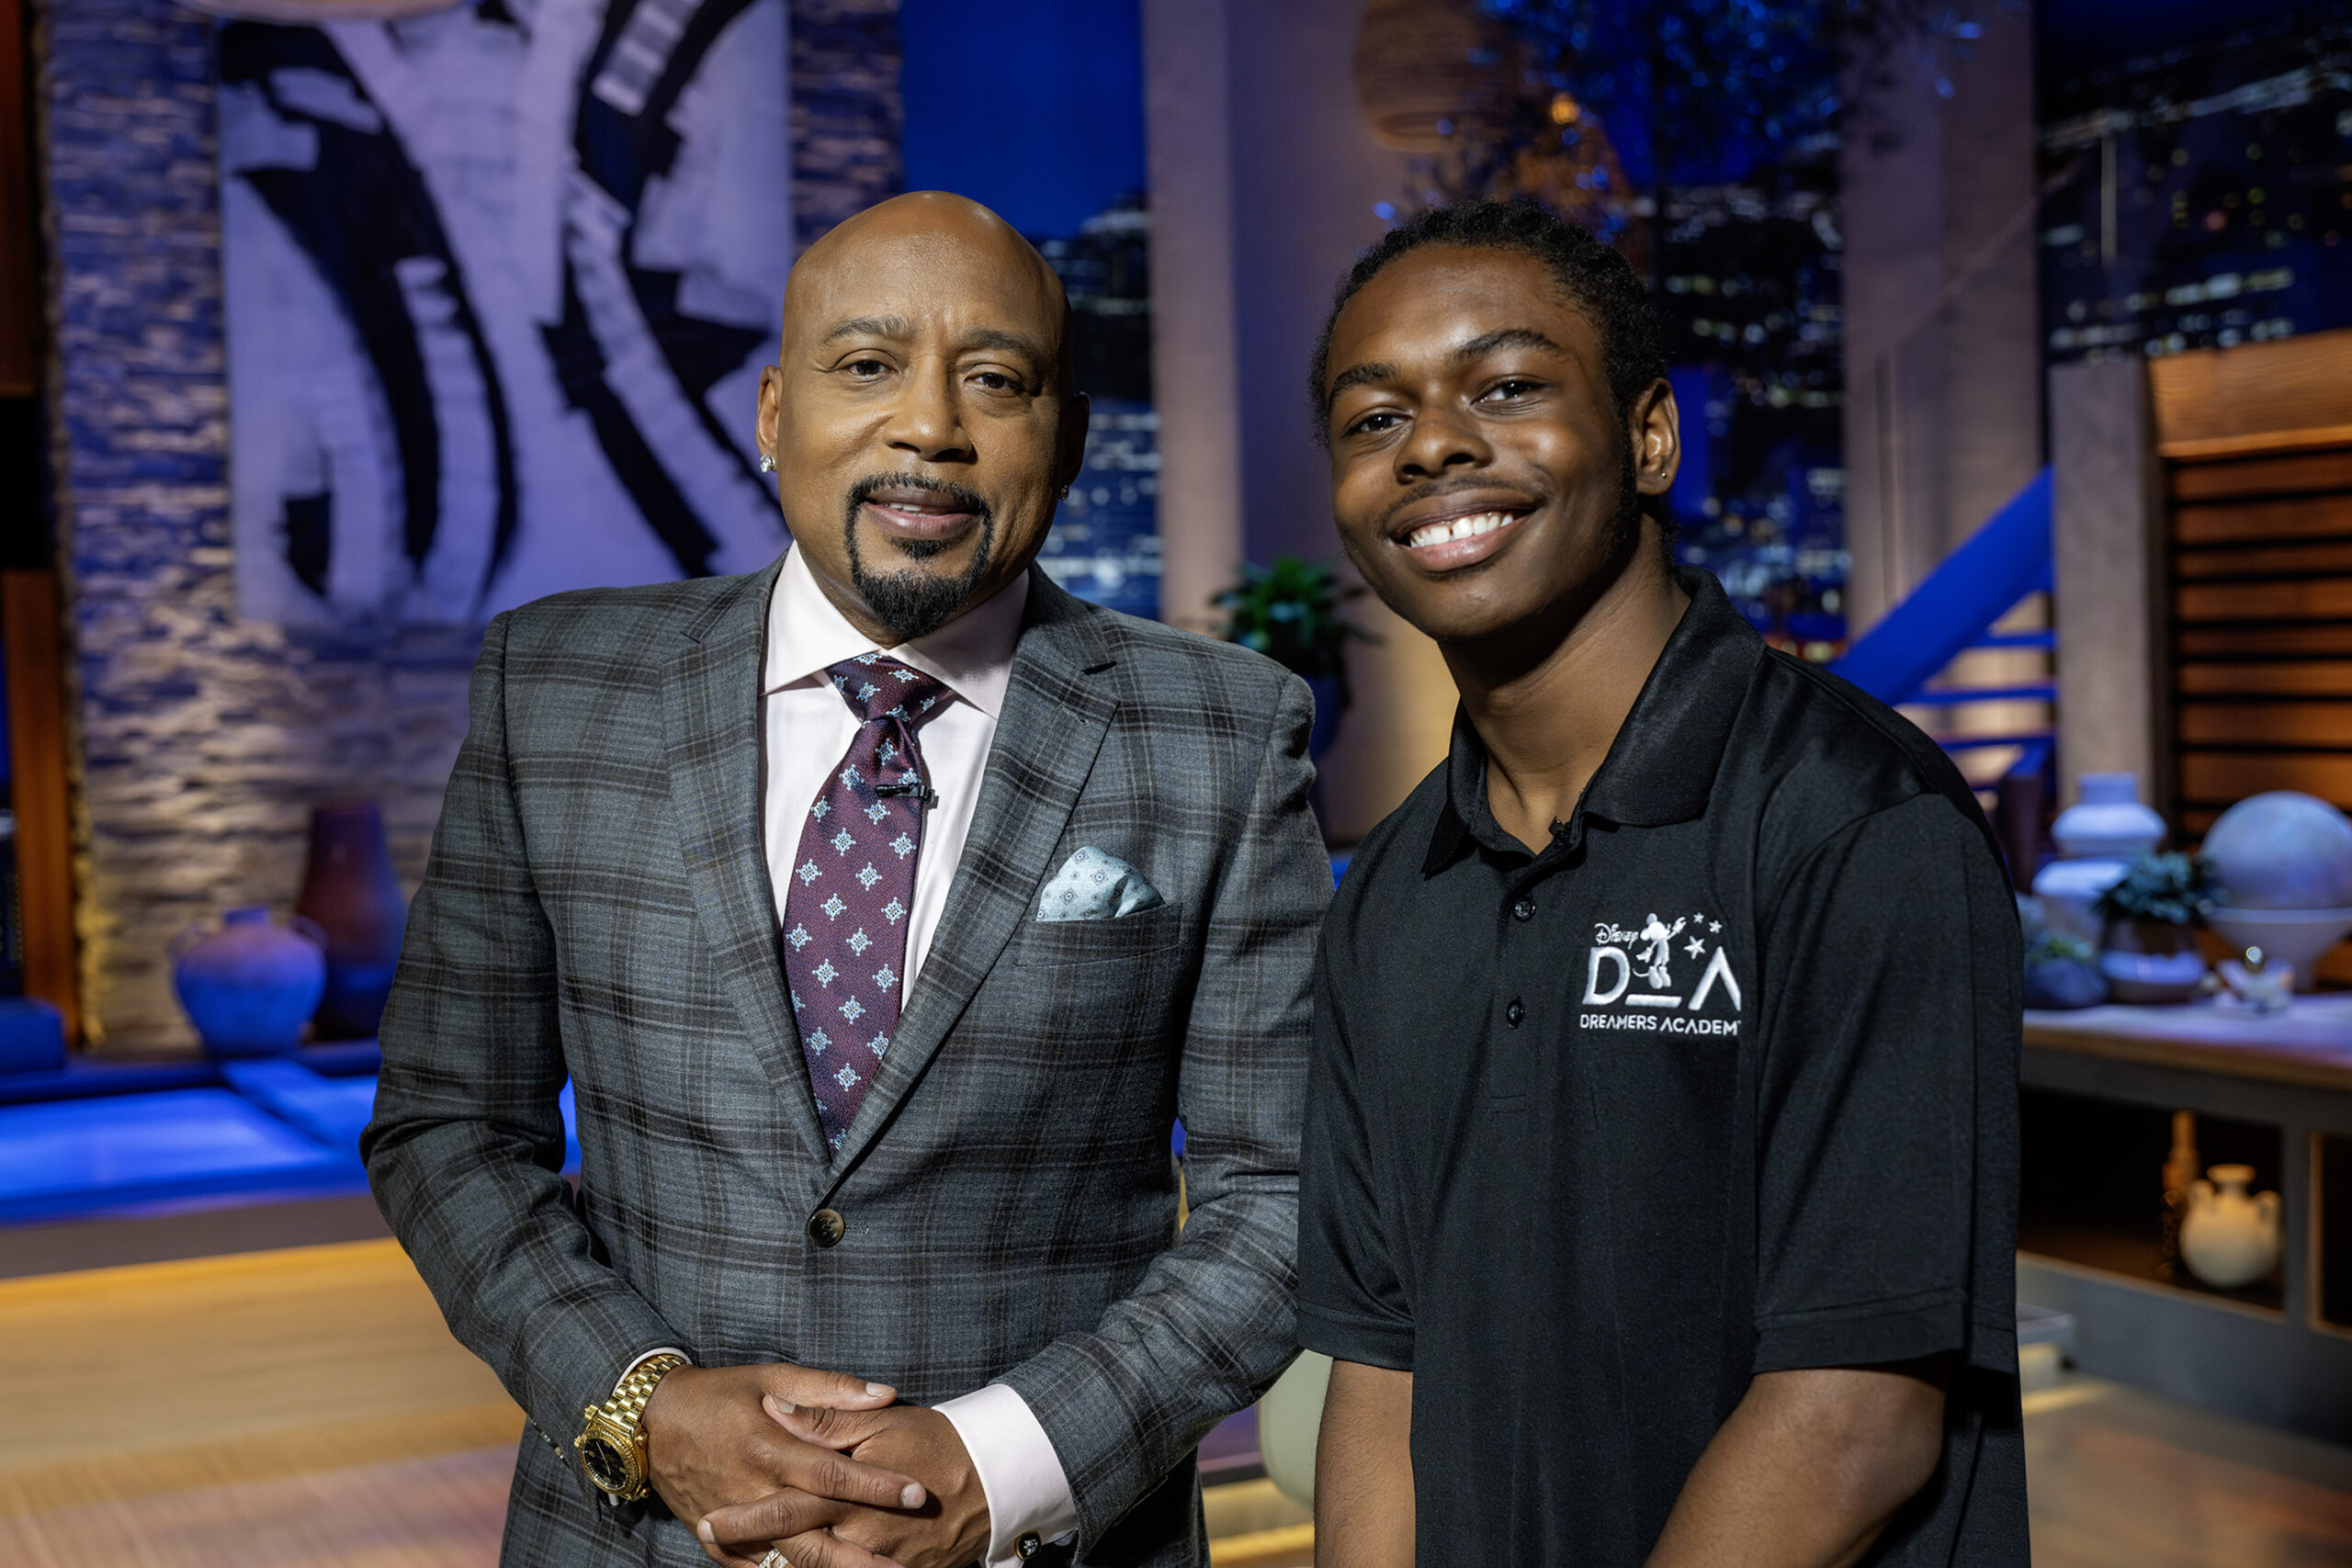 Disney Dreamers Academy Makes Dream Come True For Teen Entrepreneur With Visit to ‘Shark Tank’